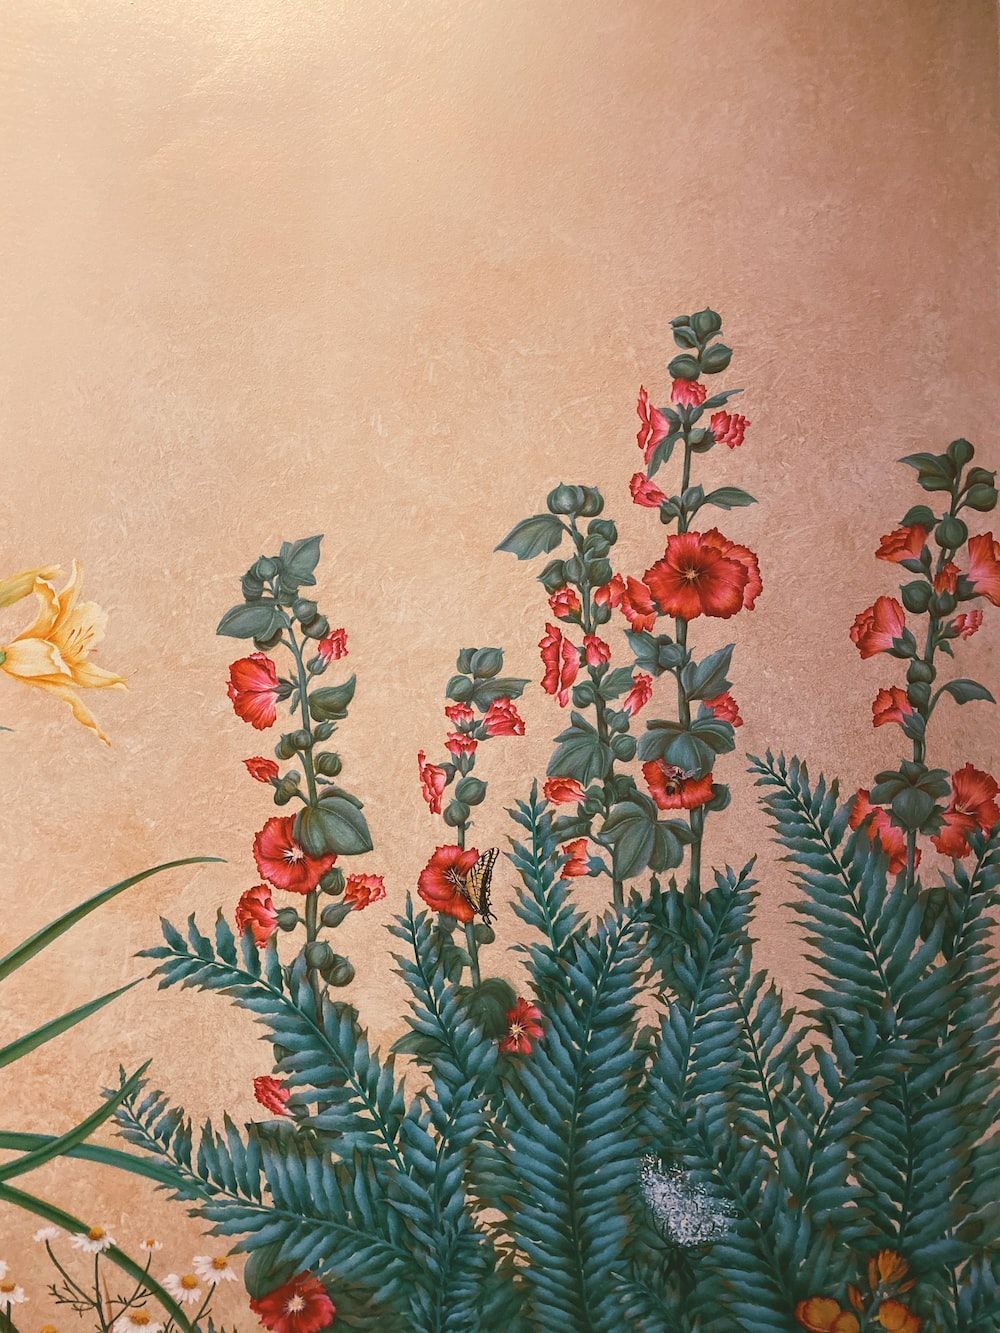 A detail of a painting with a gold background and flowers in the foreground. - Mexico